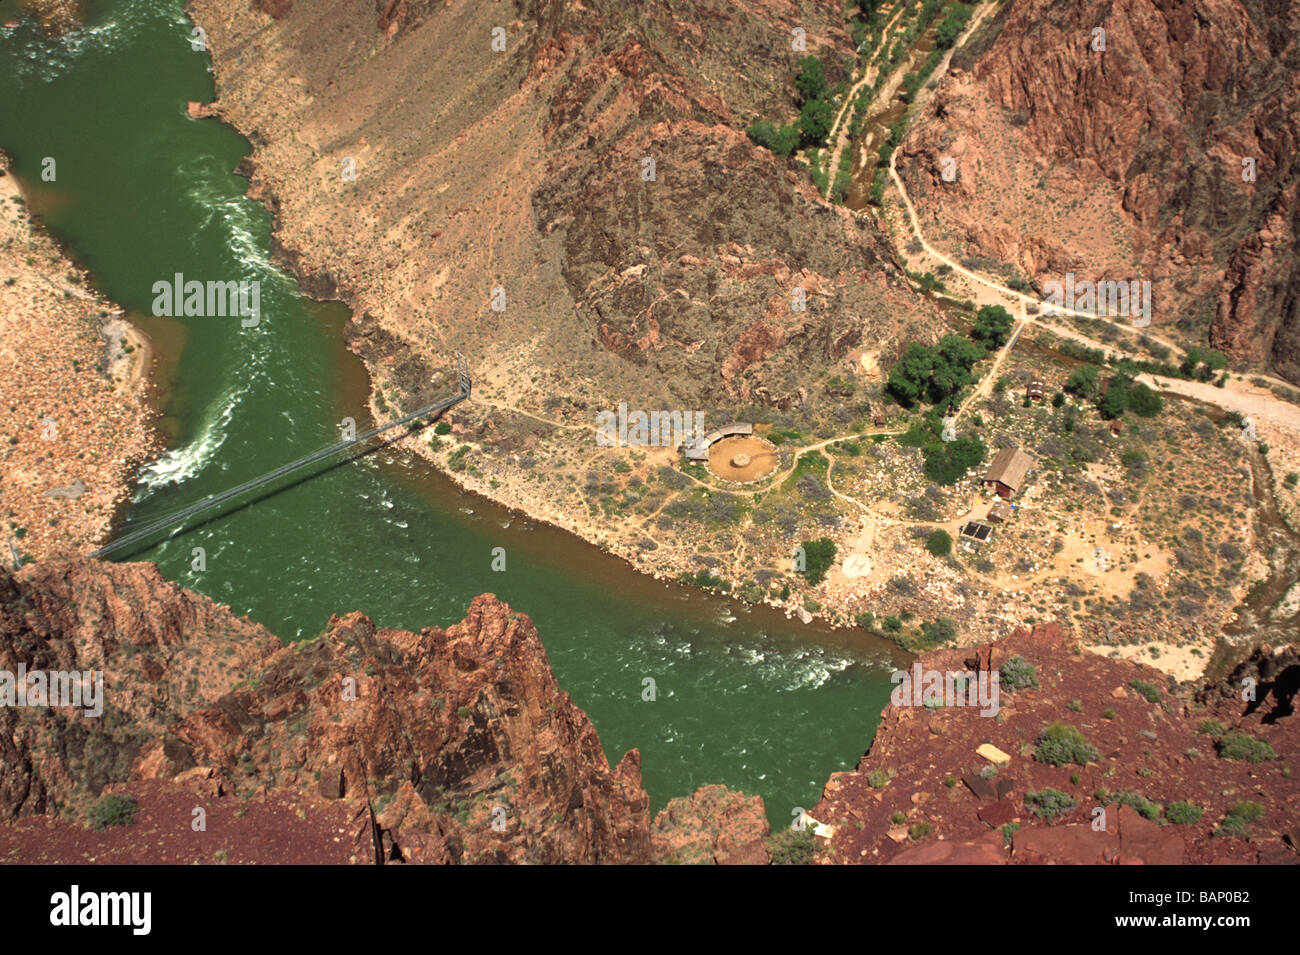 The green waters of the mighty COLORADO RIVER flow under a suspension bridge at PHANTOM RANCH ARIZONA Stock Photo